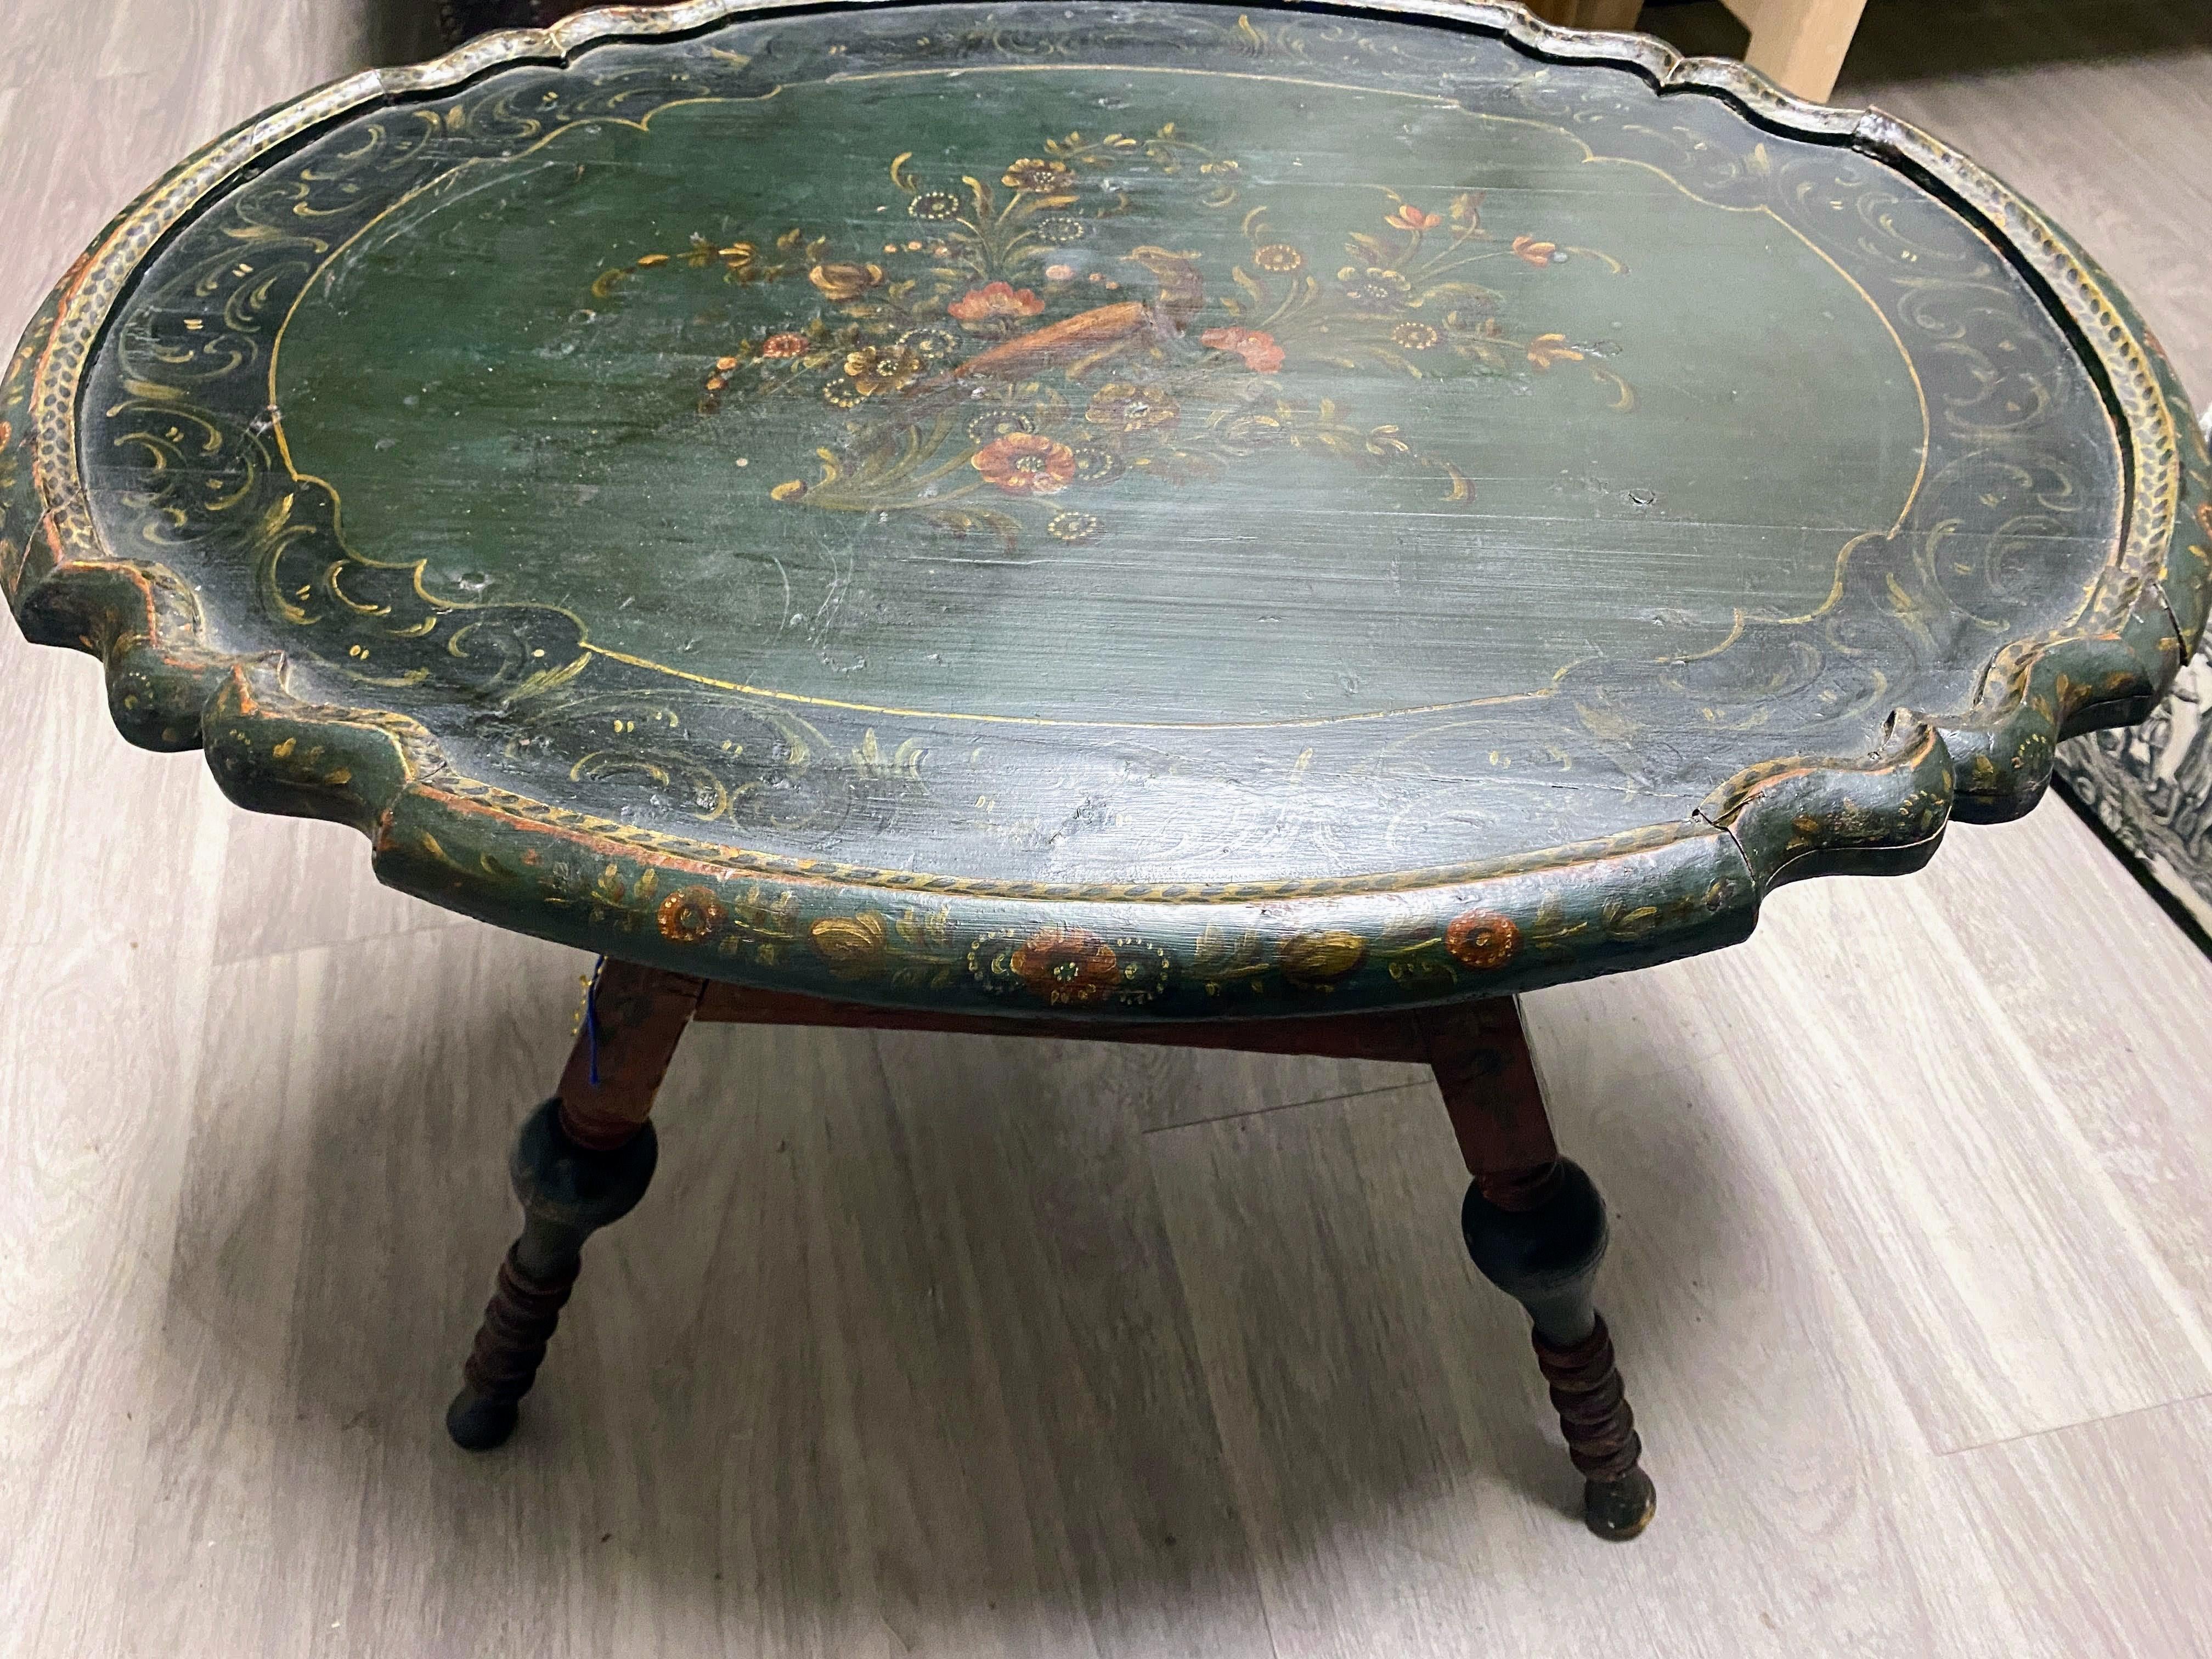 Wood Antique Dutch Green Painted Low Oval Tilt Top Table